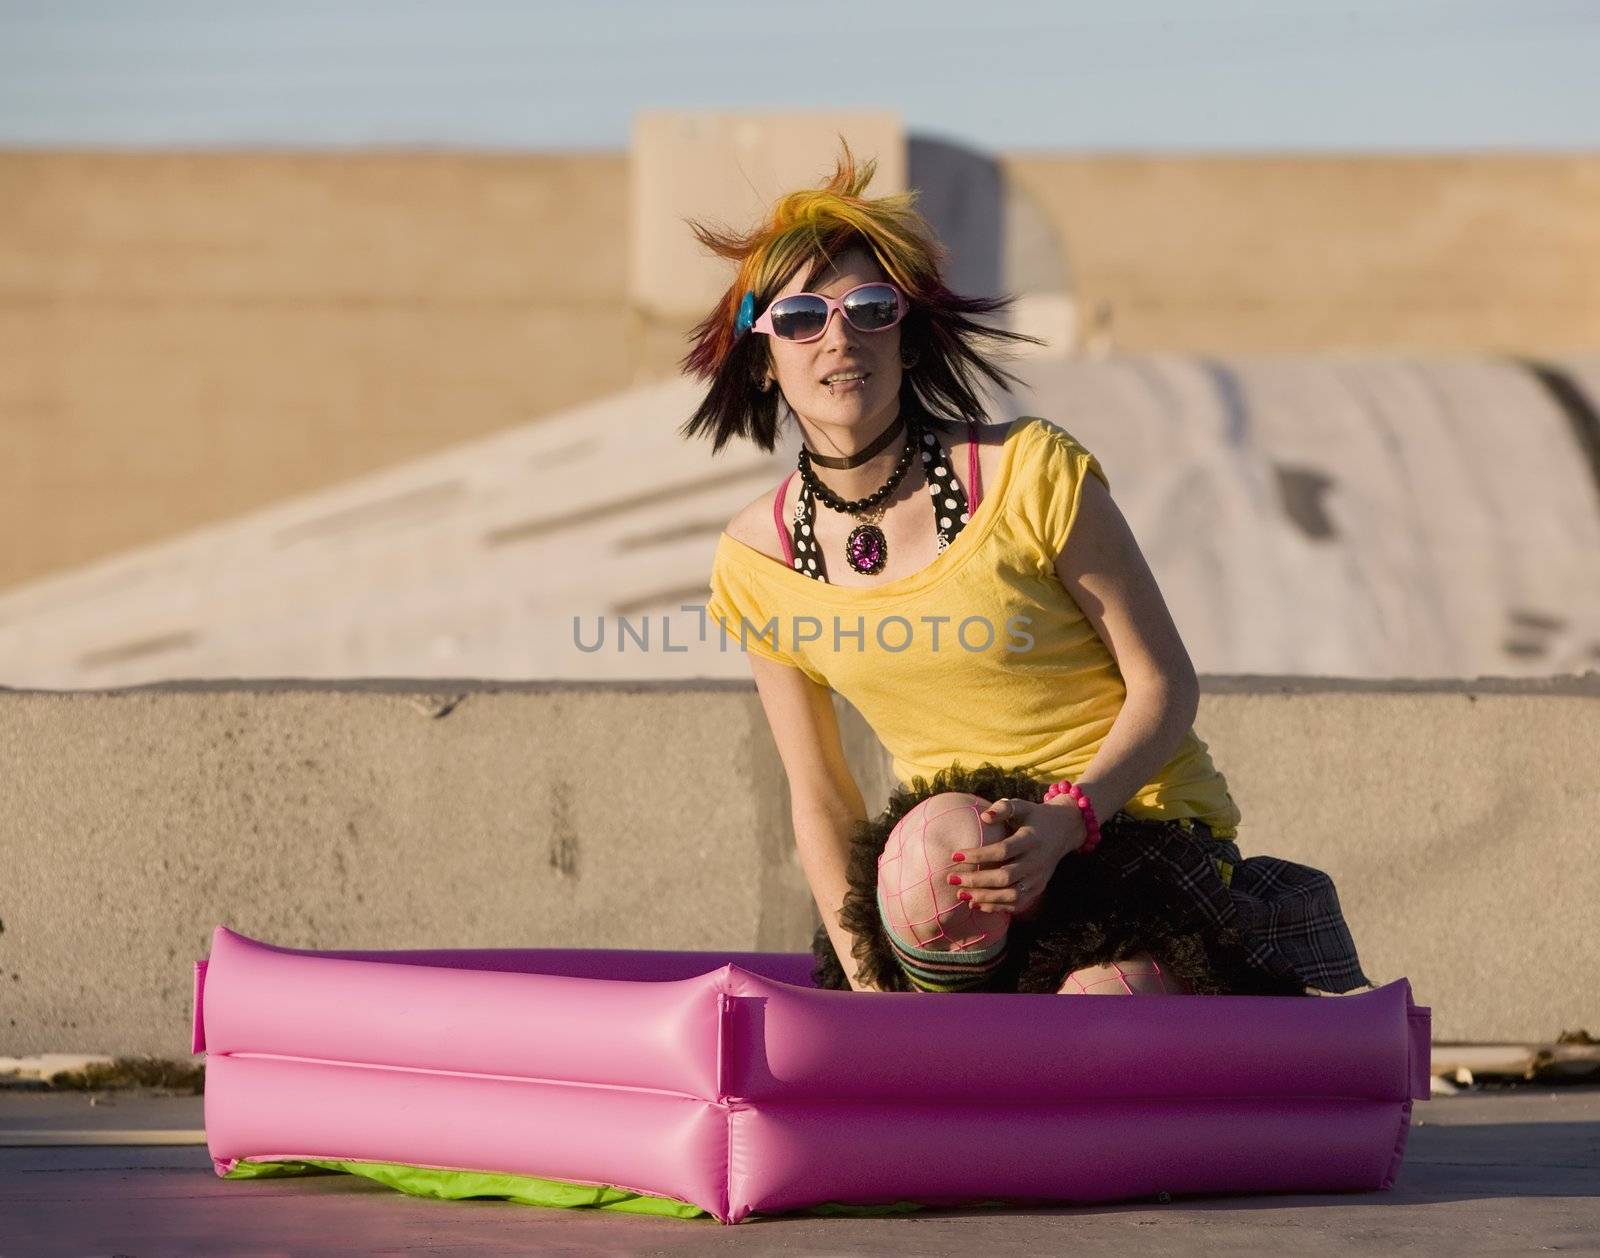 Portrait of a Punk Girl with Bright Colorful and Big Sunglasses Outdoors at Sundown